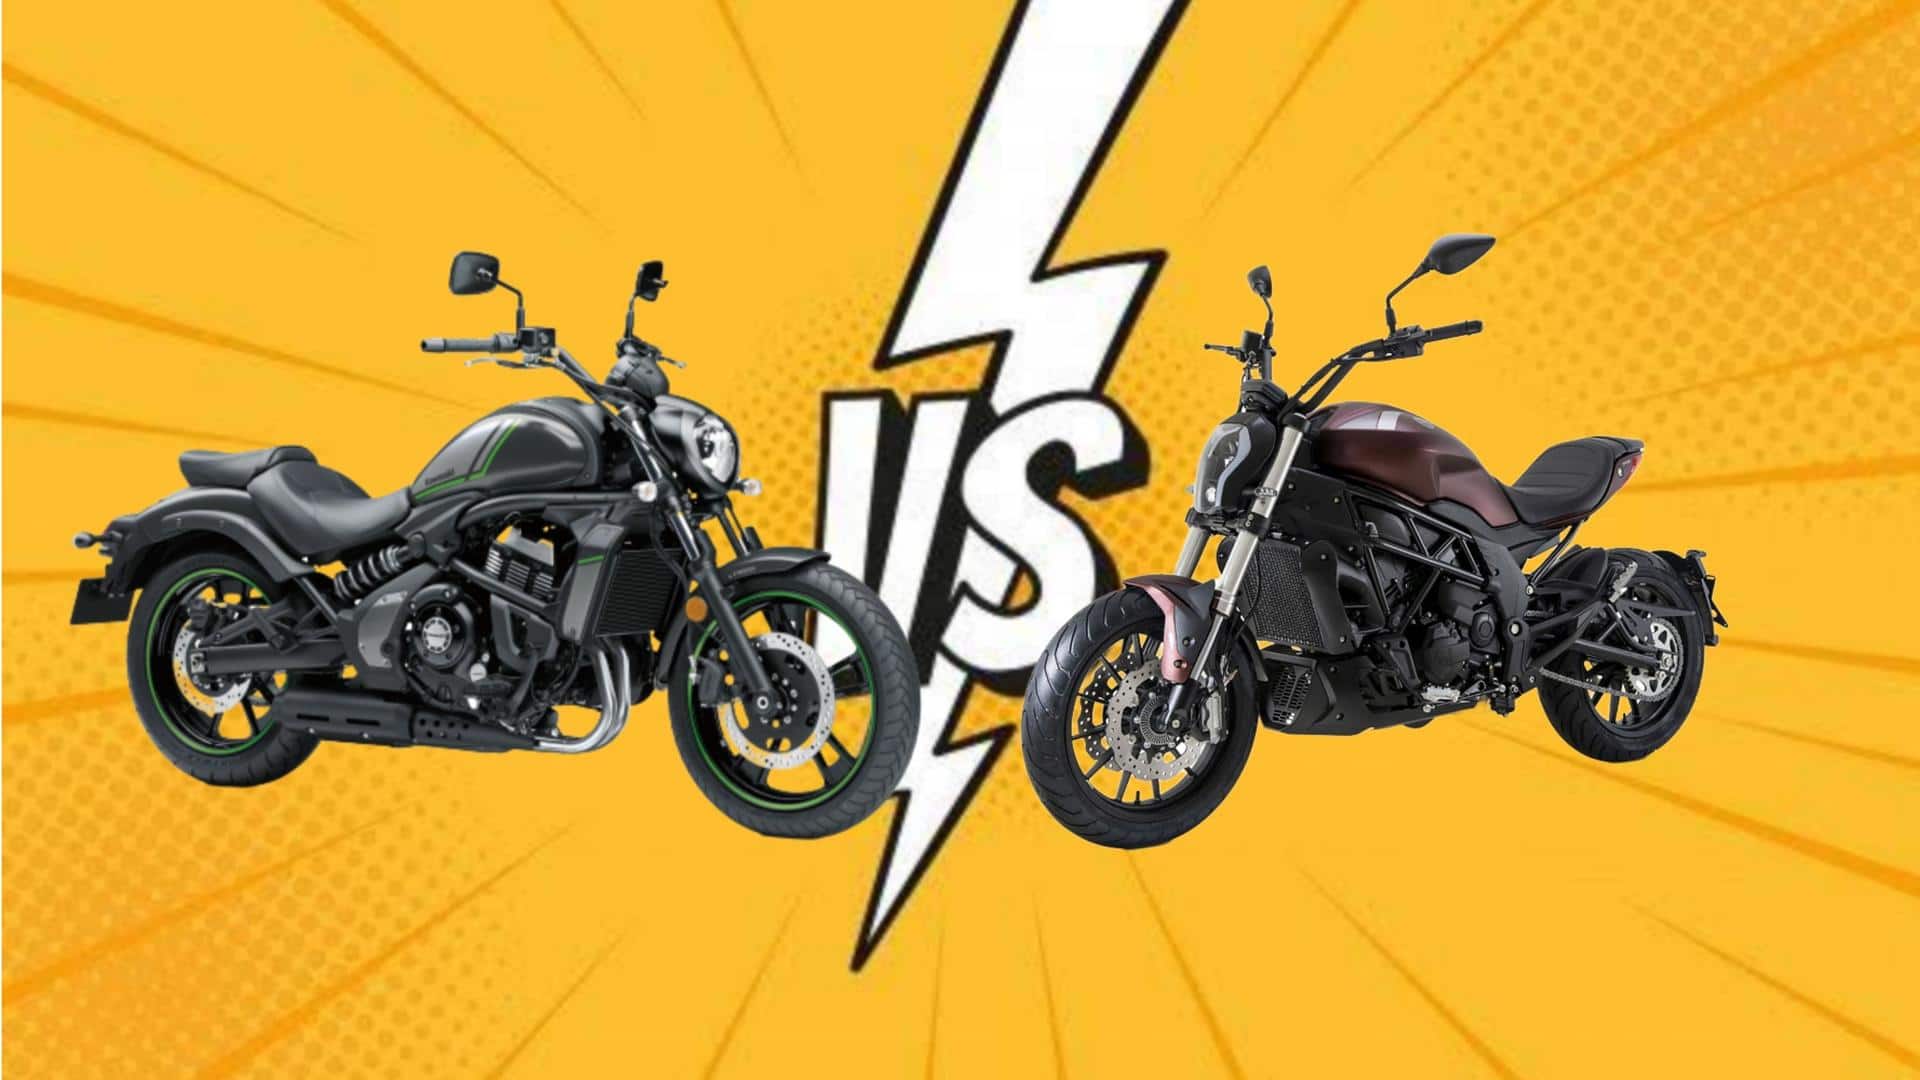 Kawasaki Vulcan S v/s Benelli 502C: Which one is better?